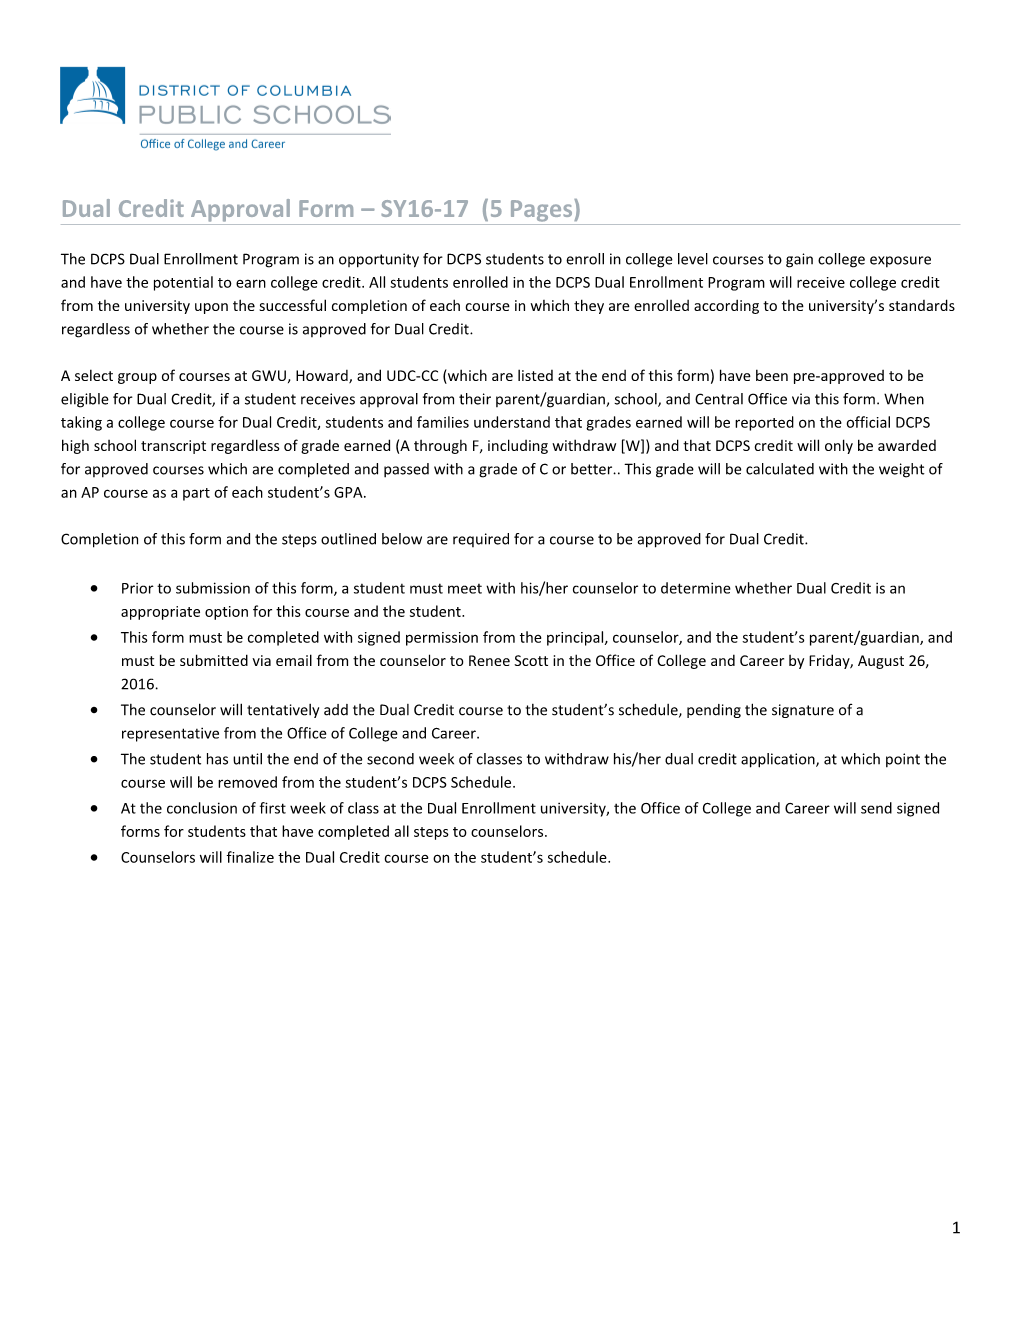 Dual Credit Approval Form SY16-17 (5 Pages)